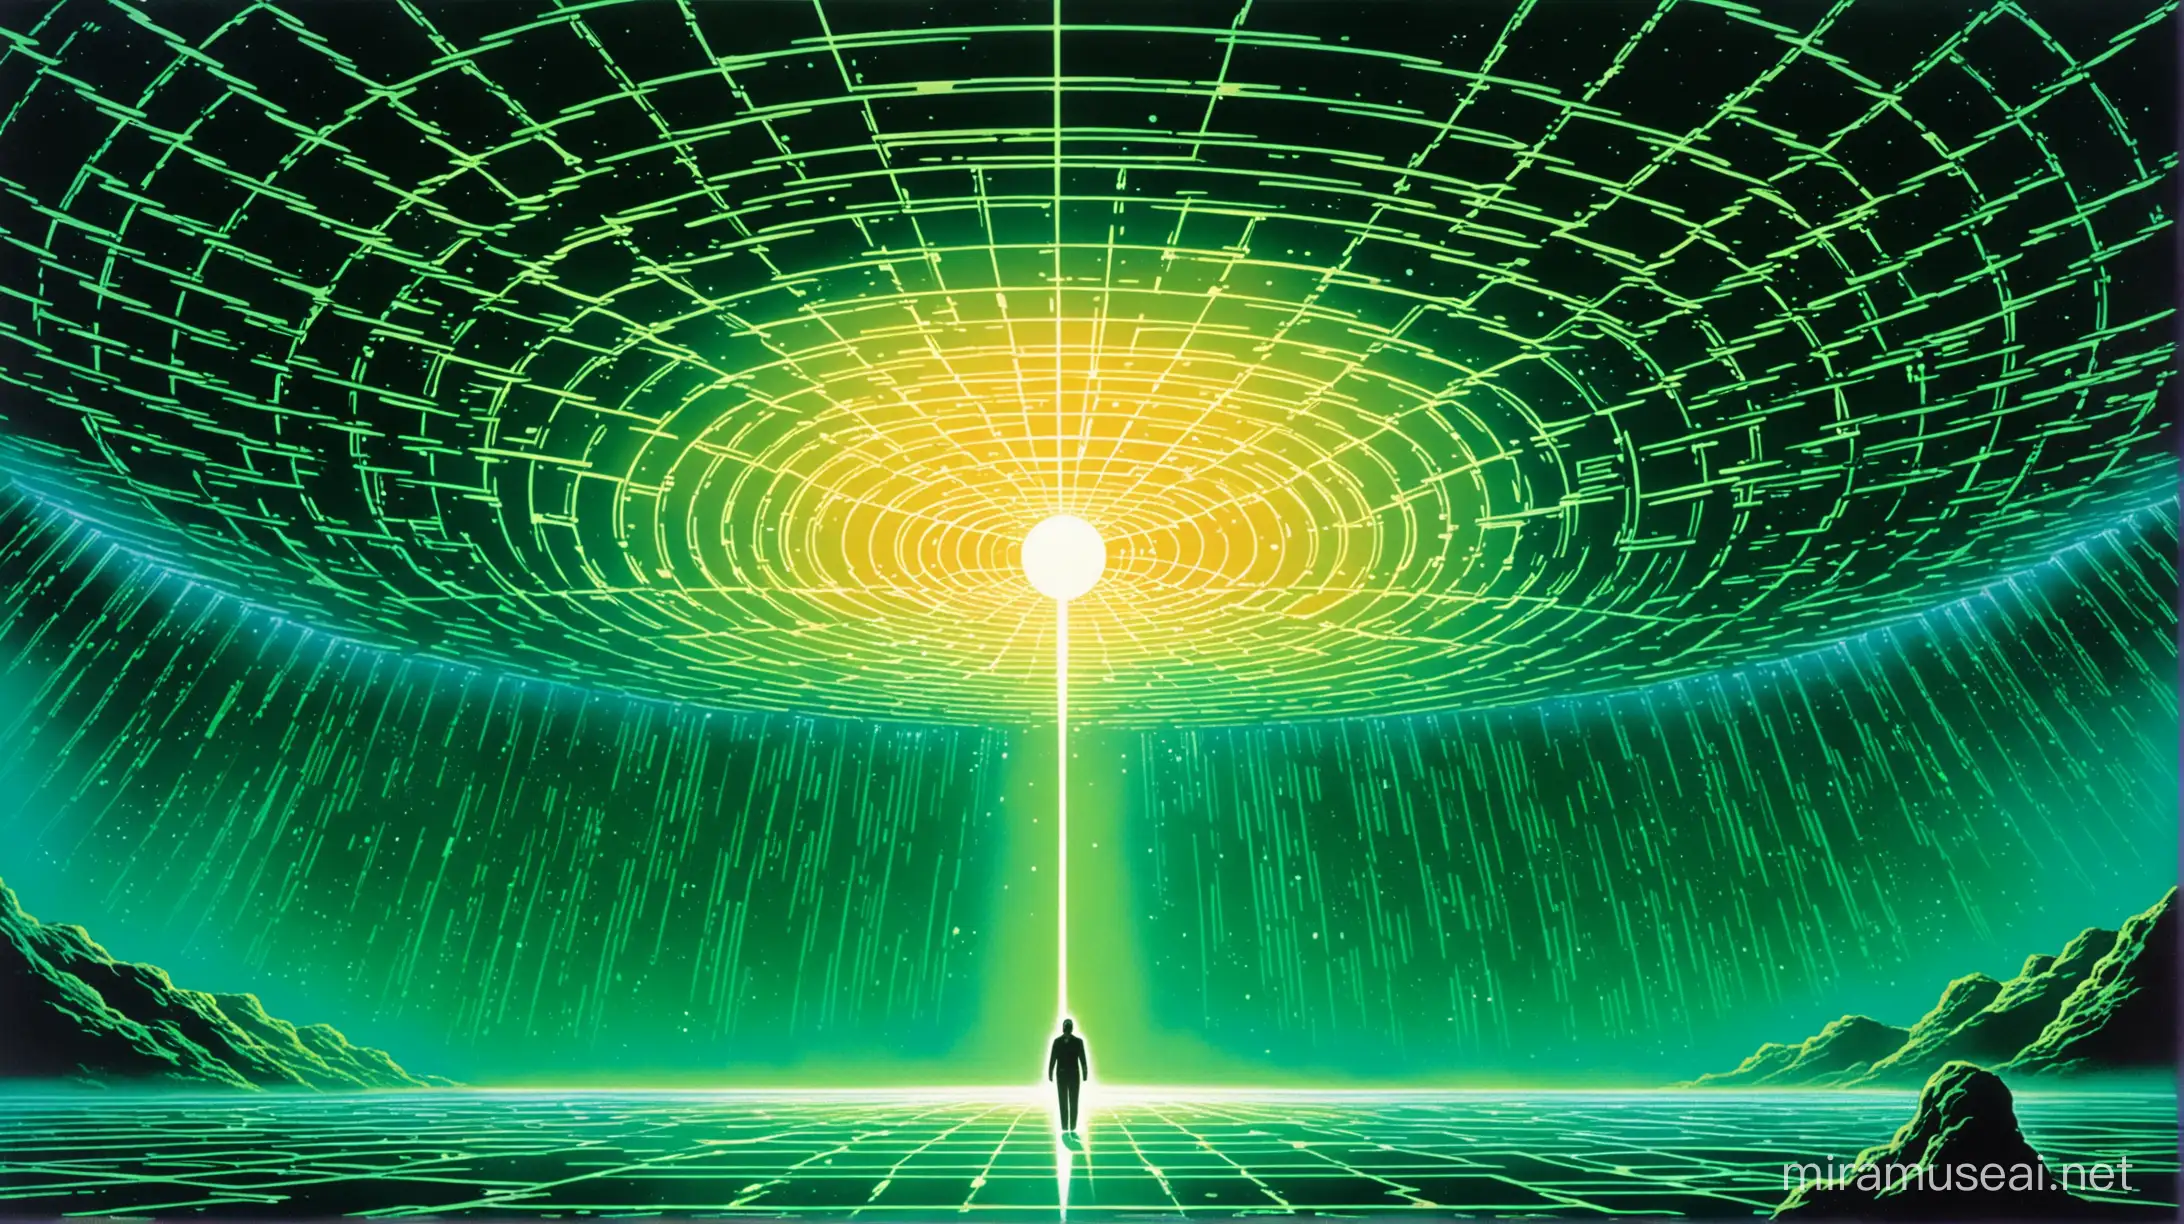 a depiction of the astral plane in the 1970s CCCP, floating in the astral realm, retro sci-fi stalker style, retro sci-fi, astral projection, concept art, Toujin Kit, The Matrix Reloaded, spiritual realm, atomic blonde, retro, surreal, tarkovsky, ethereal lighting